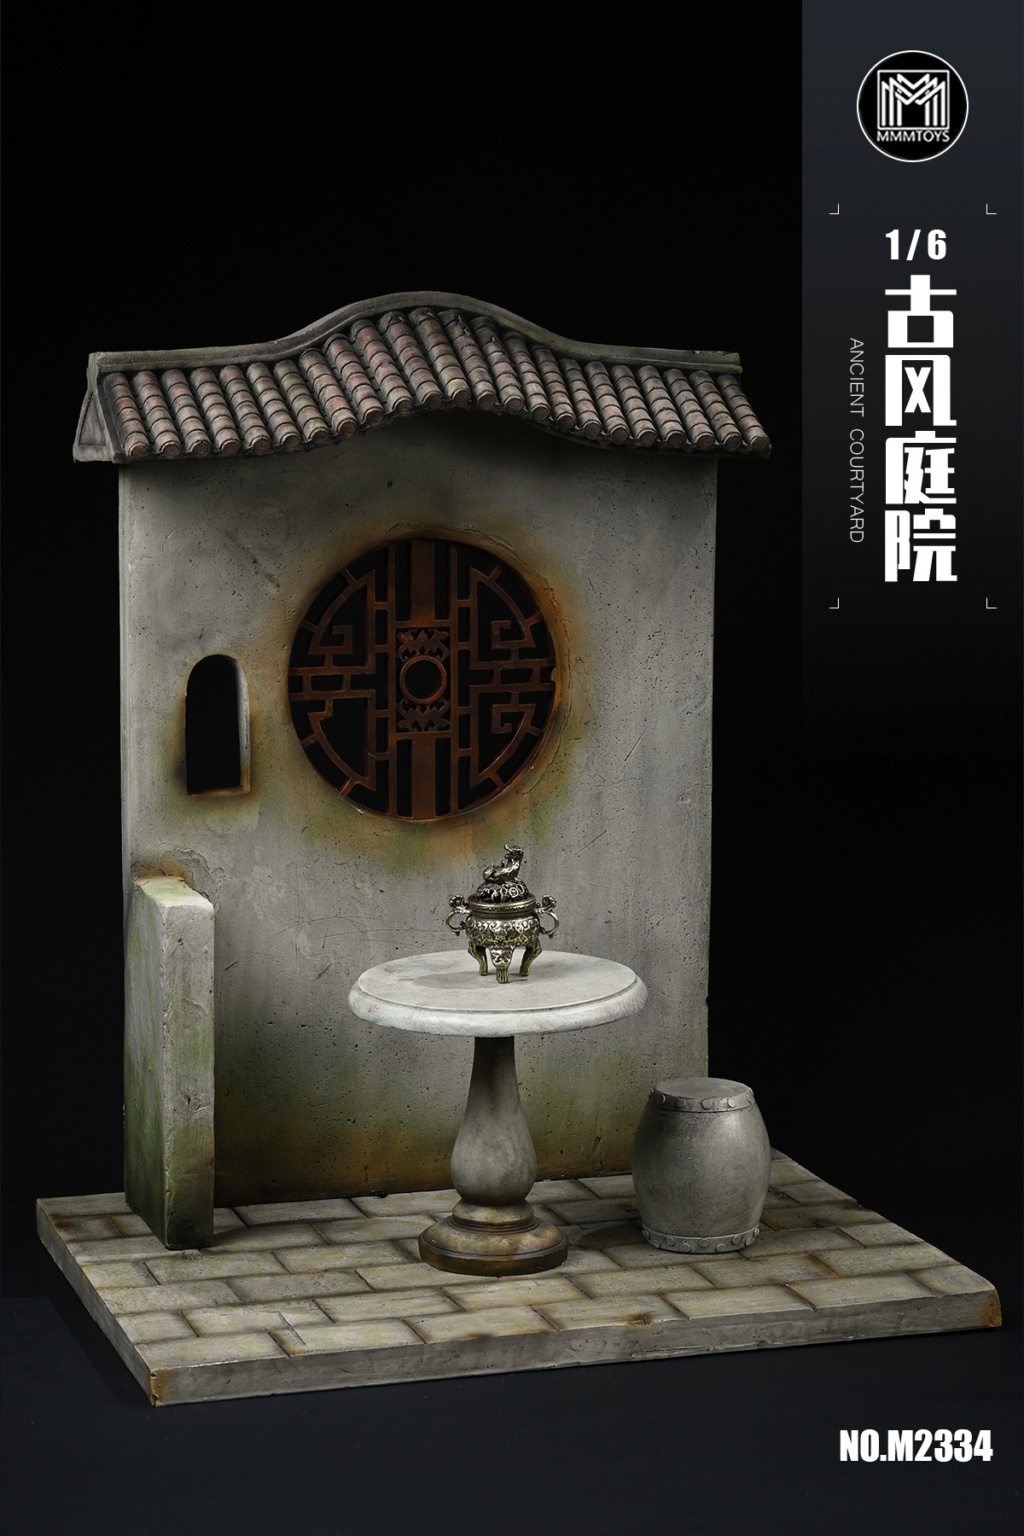 MMMToys - NEW PRODUCT: MMMTOYS: 1/6 Ancient courtyard M2334 14152016